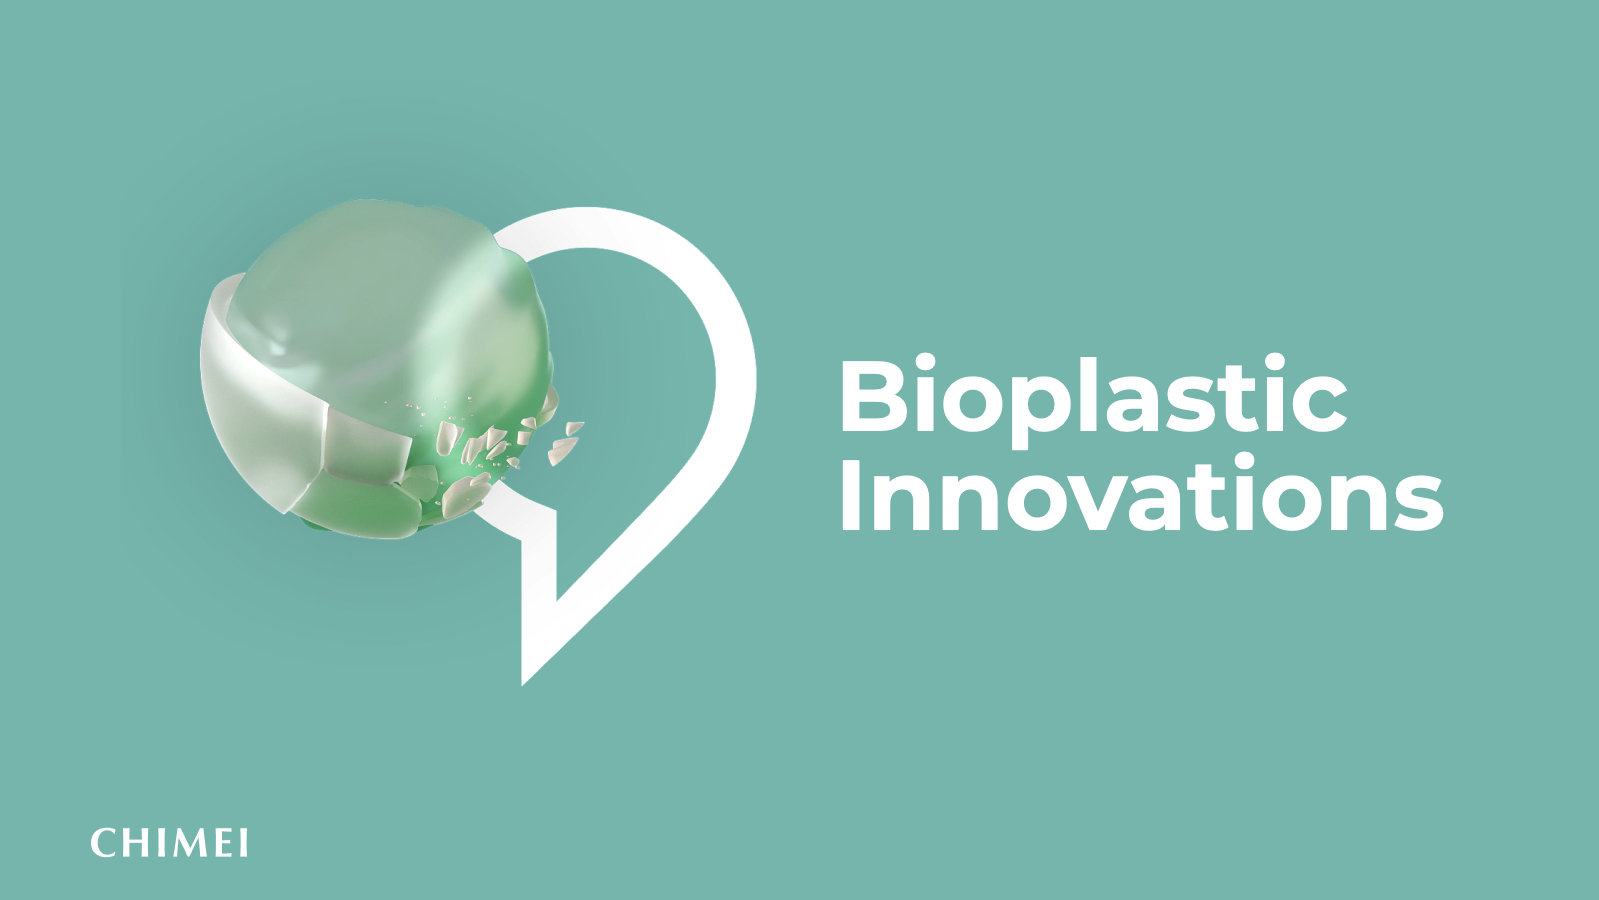 CHIMEI is developing bioplastics that are either made from bio-based resources or will decompose after use. As a result, these materials will reduce its waste and fossil fuel consumption.